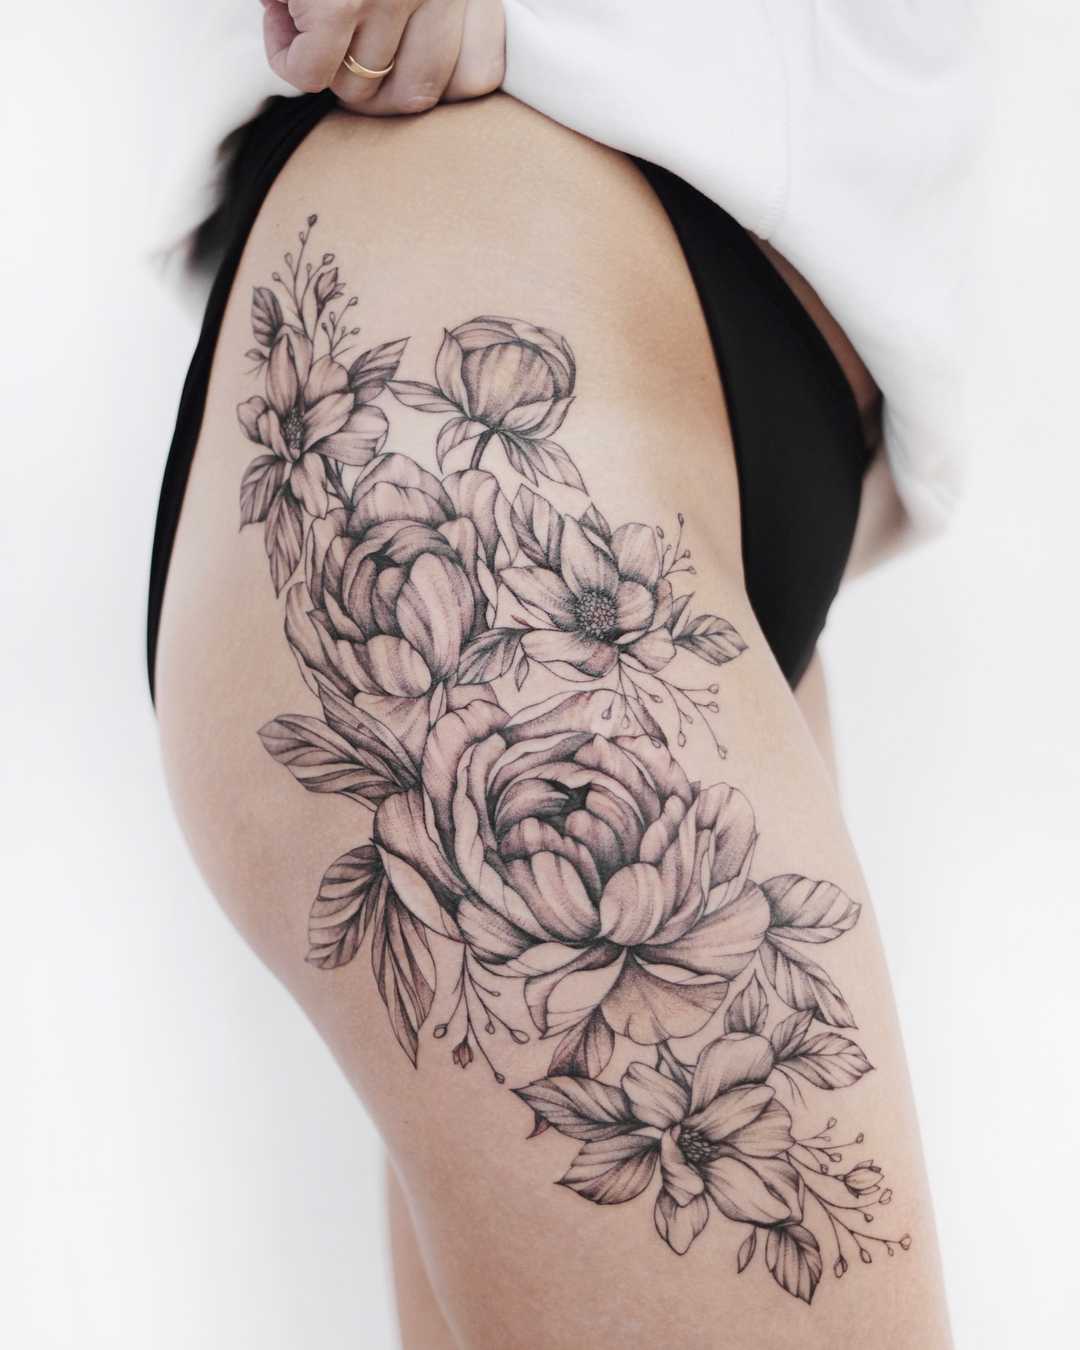 Black and grey floral piece on the thigh